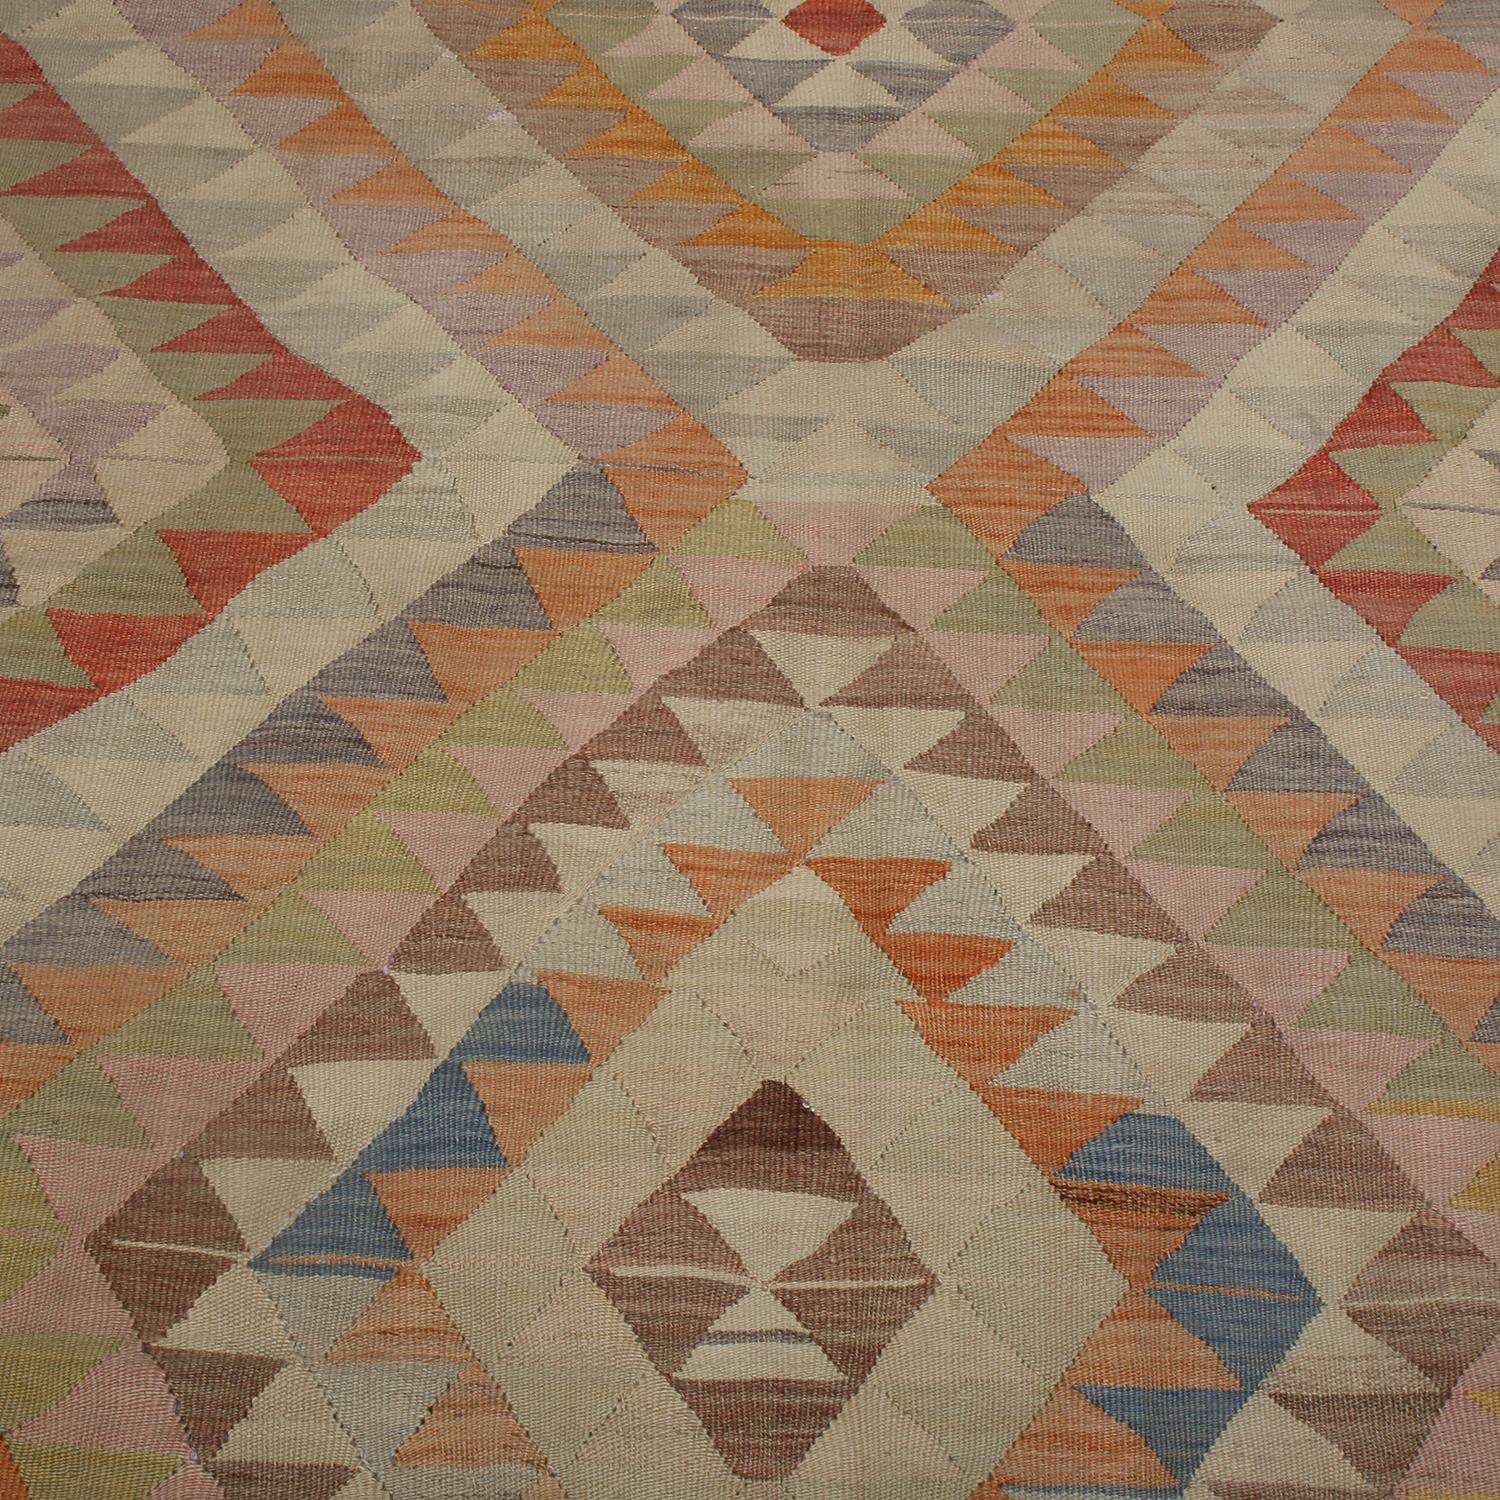 Hand-Woven Vintage Midcentury Afyon Cream-Pink and Blue Wool Kilim Rug, Multi-Color Accent